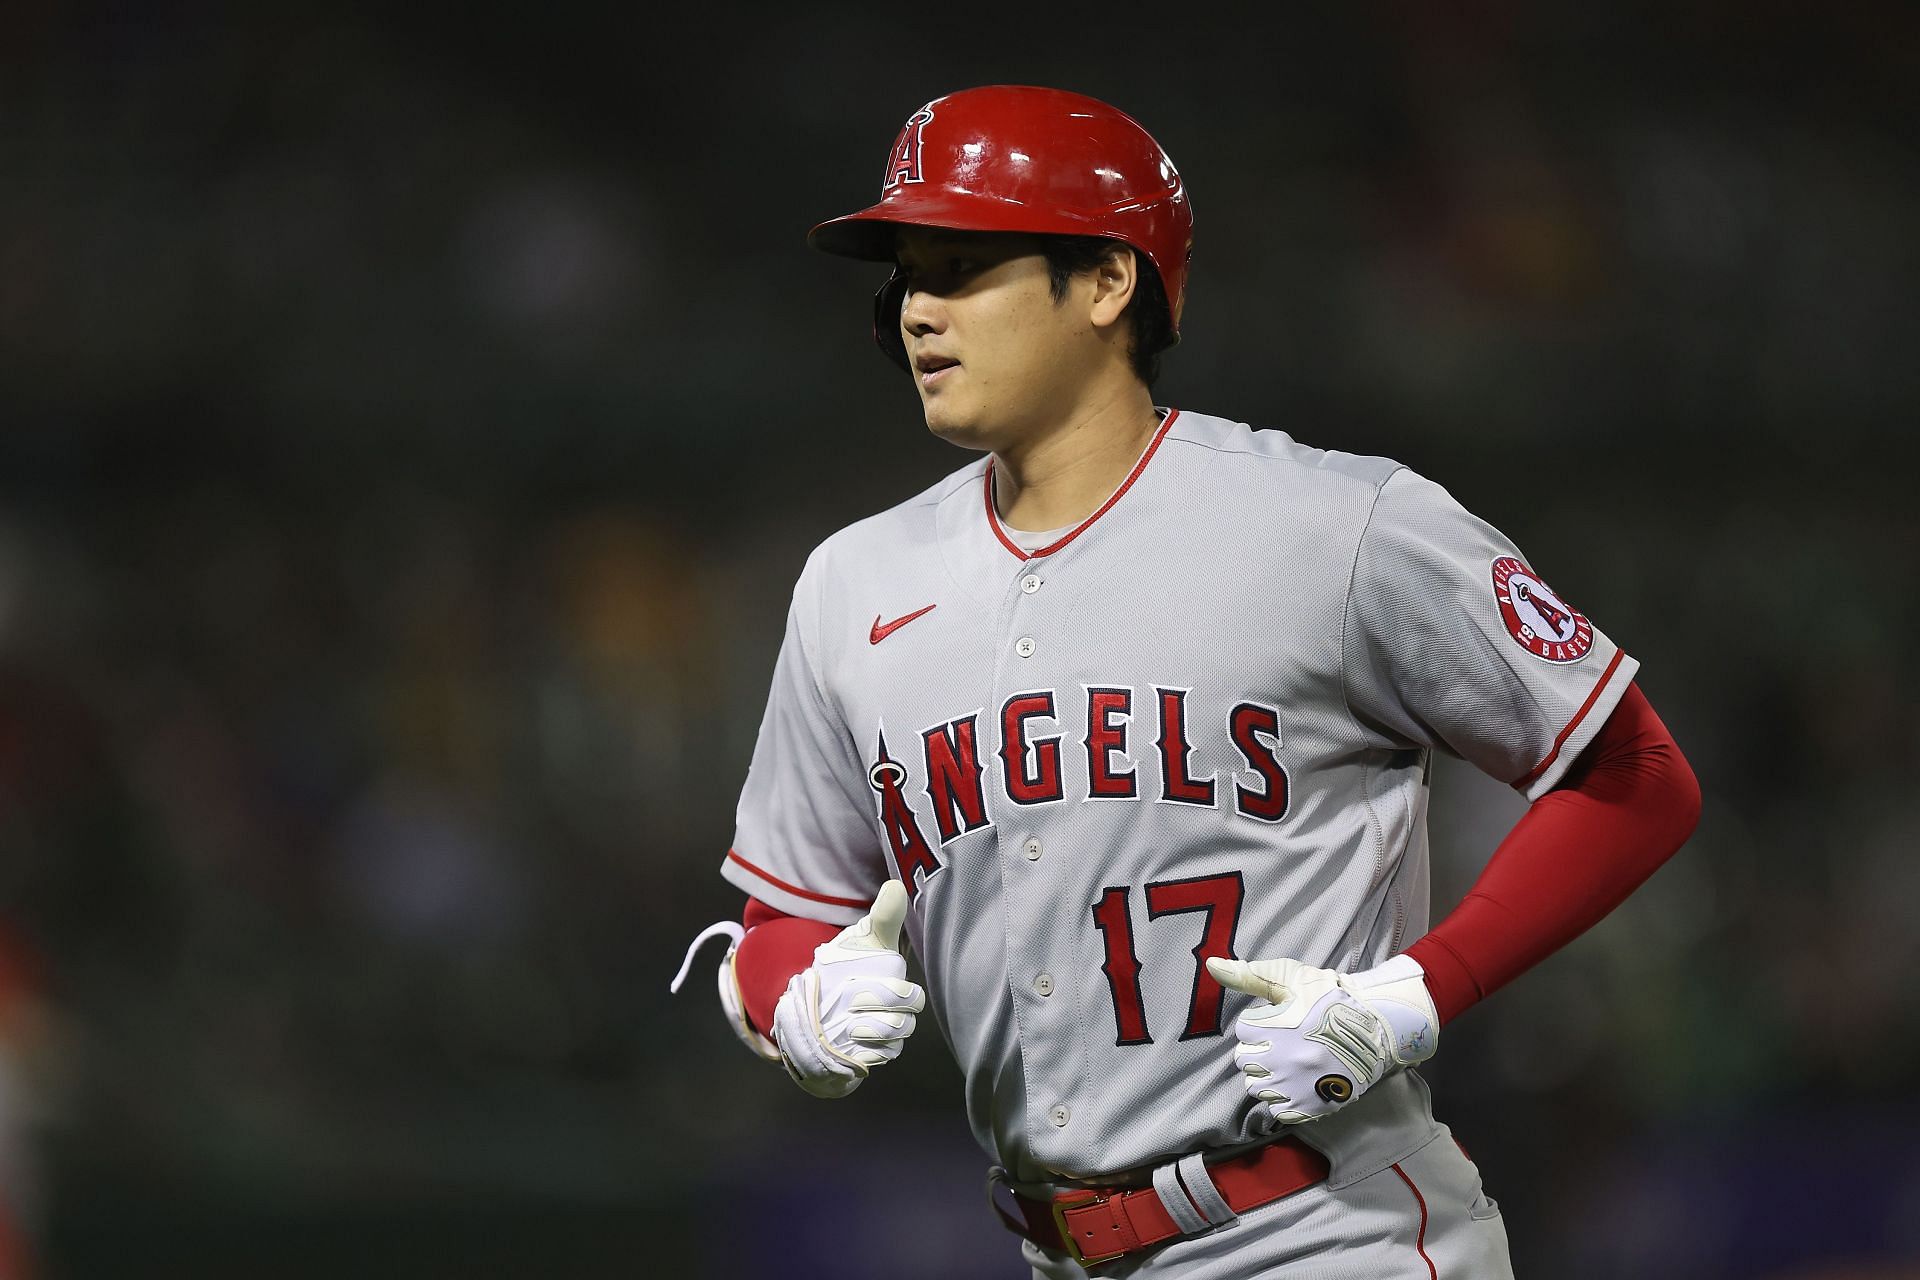 Why Shohei Ohtani's batting practice session ahead of World